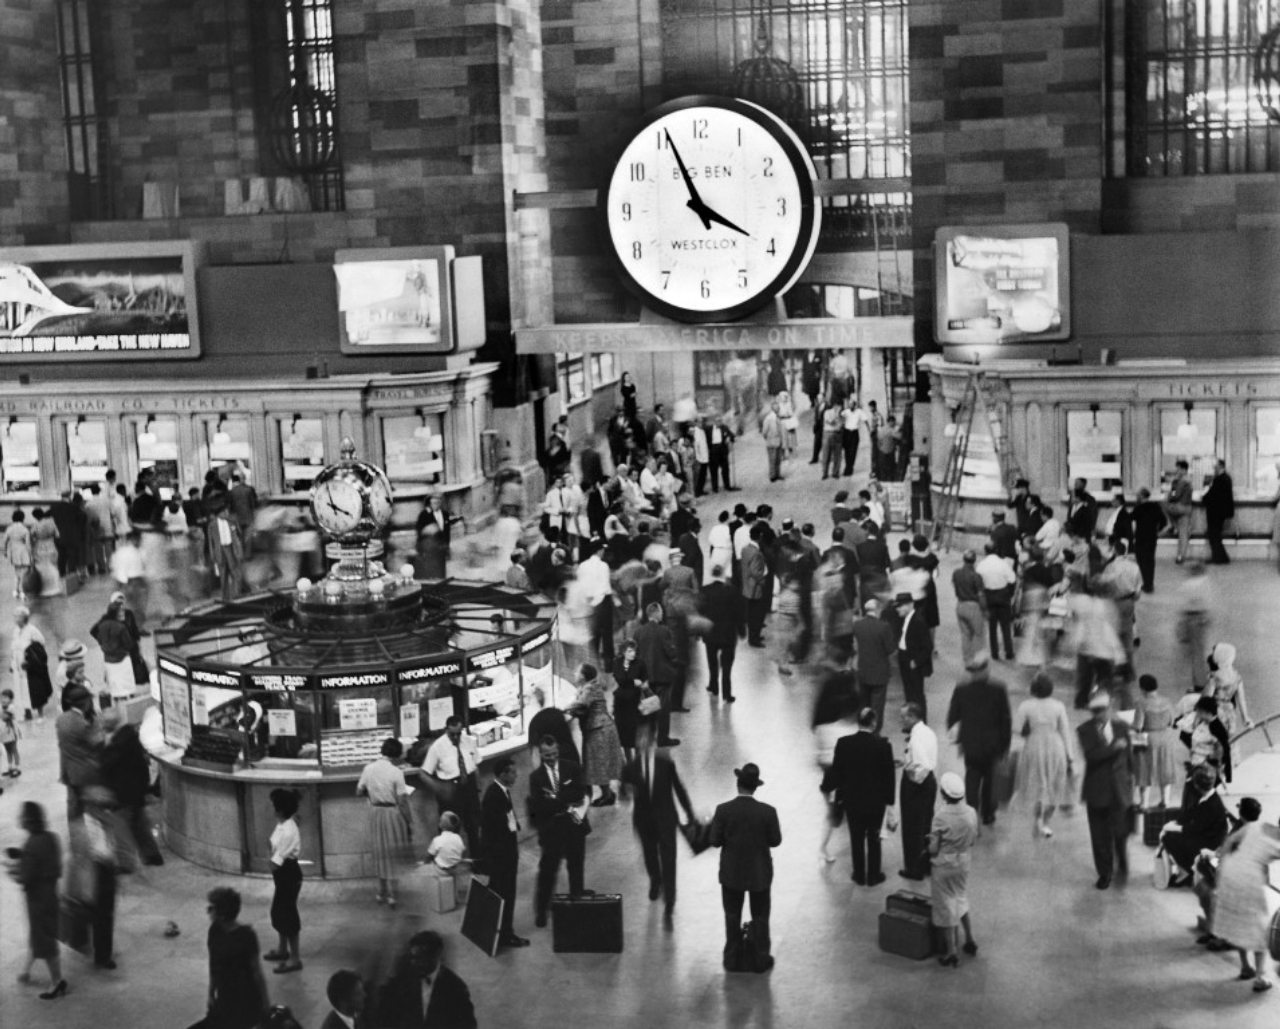 The clock over the south entrance to the main concourse at Grand Central Terminal, New York, in 1959. Built by Westclox, it is 15 feet in diameter and weighs three-quarters of a ton. It faces two ways. Amtrak will temporarily restore some intercity service to Grand Central Terminal to relieve pressure on the beleaguered Pennsylvania Station. (Arthur Brower/The New York Times)